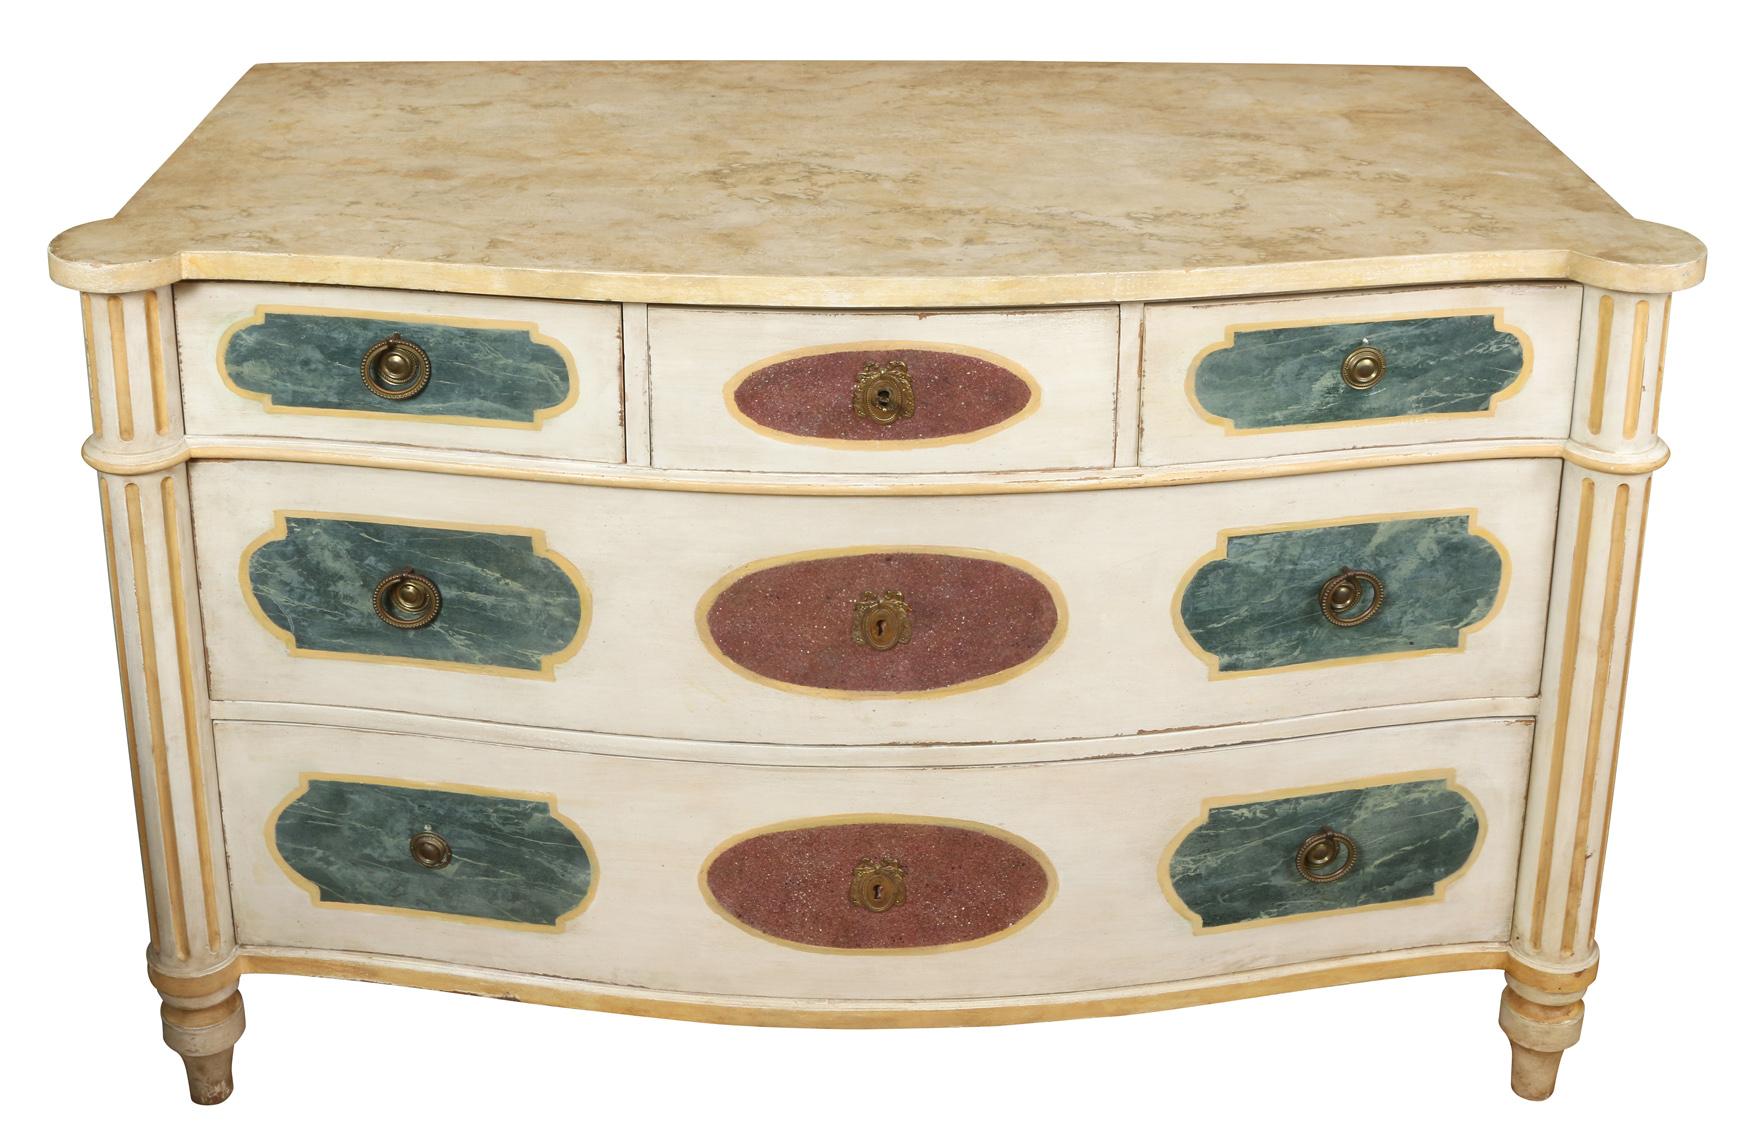 Hand-Painted Italian Polychrome Commode with Faux Marble Top